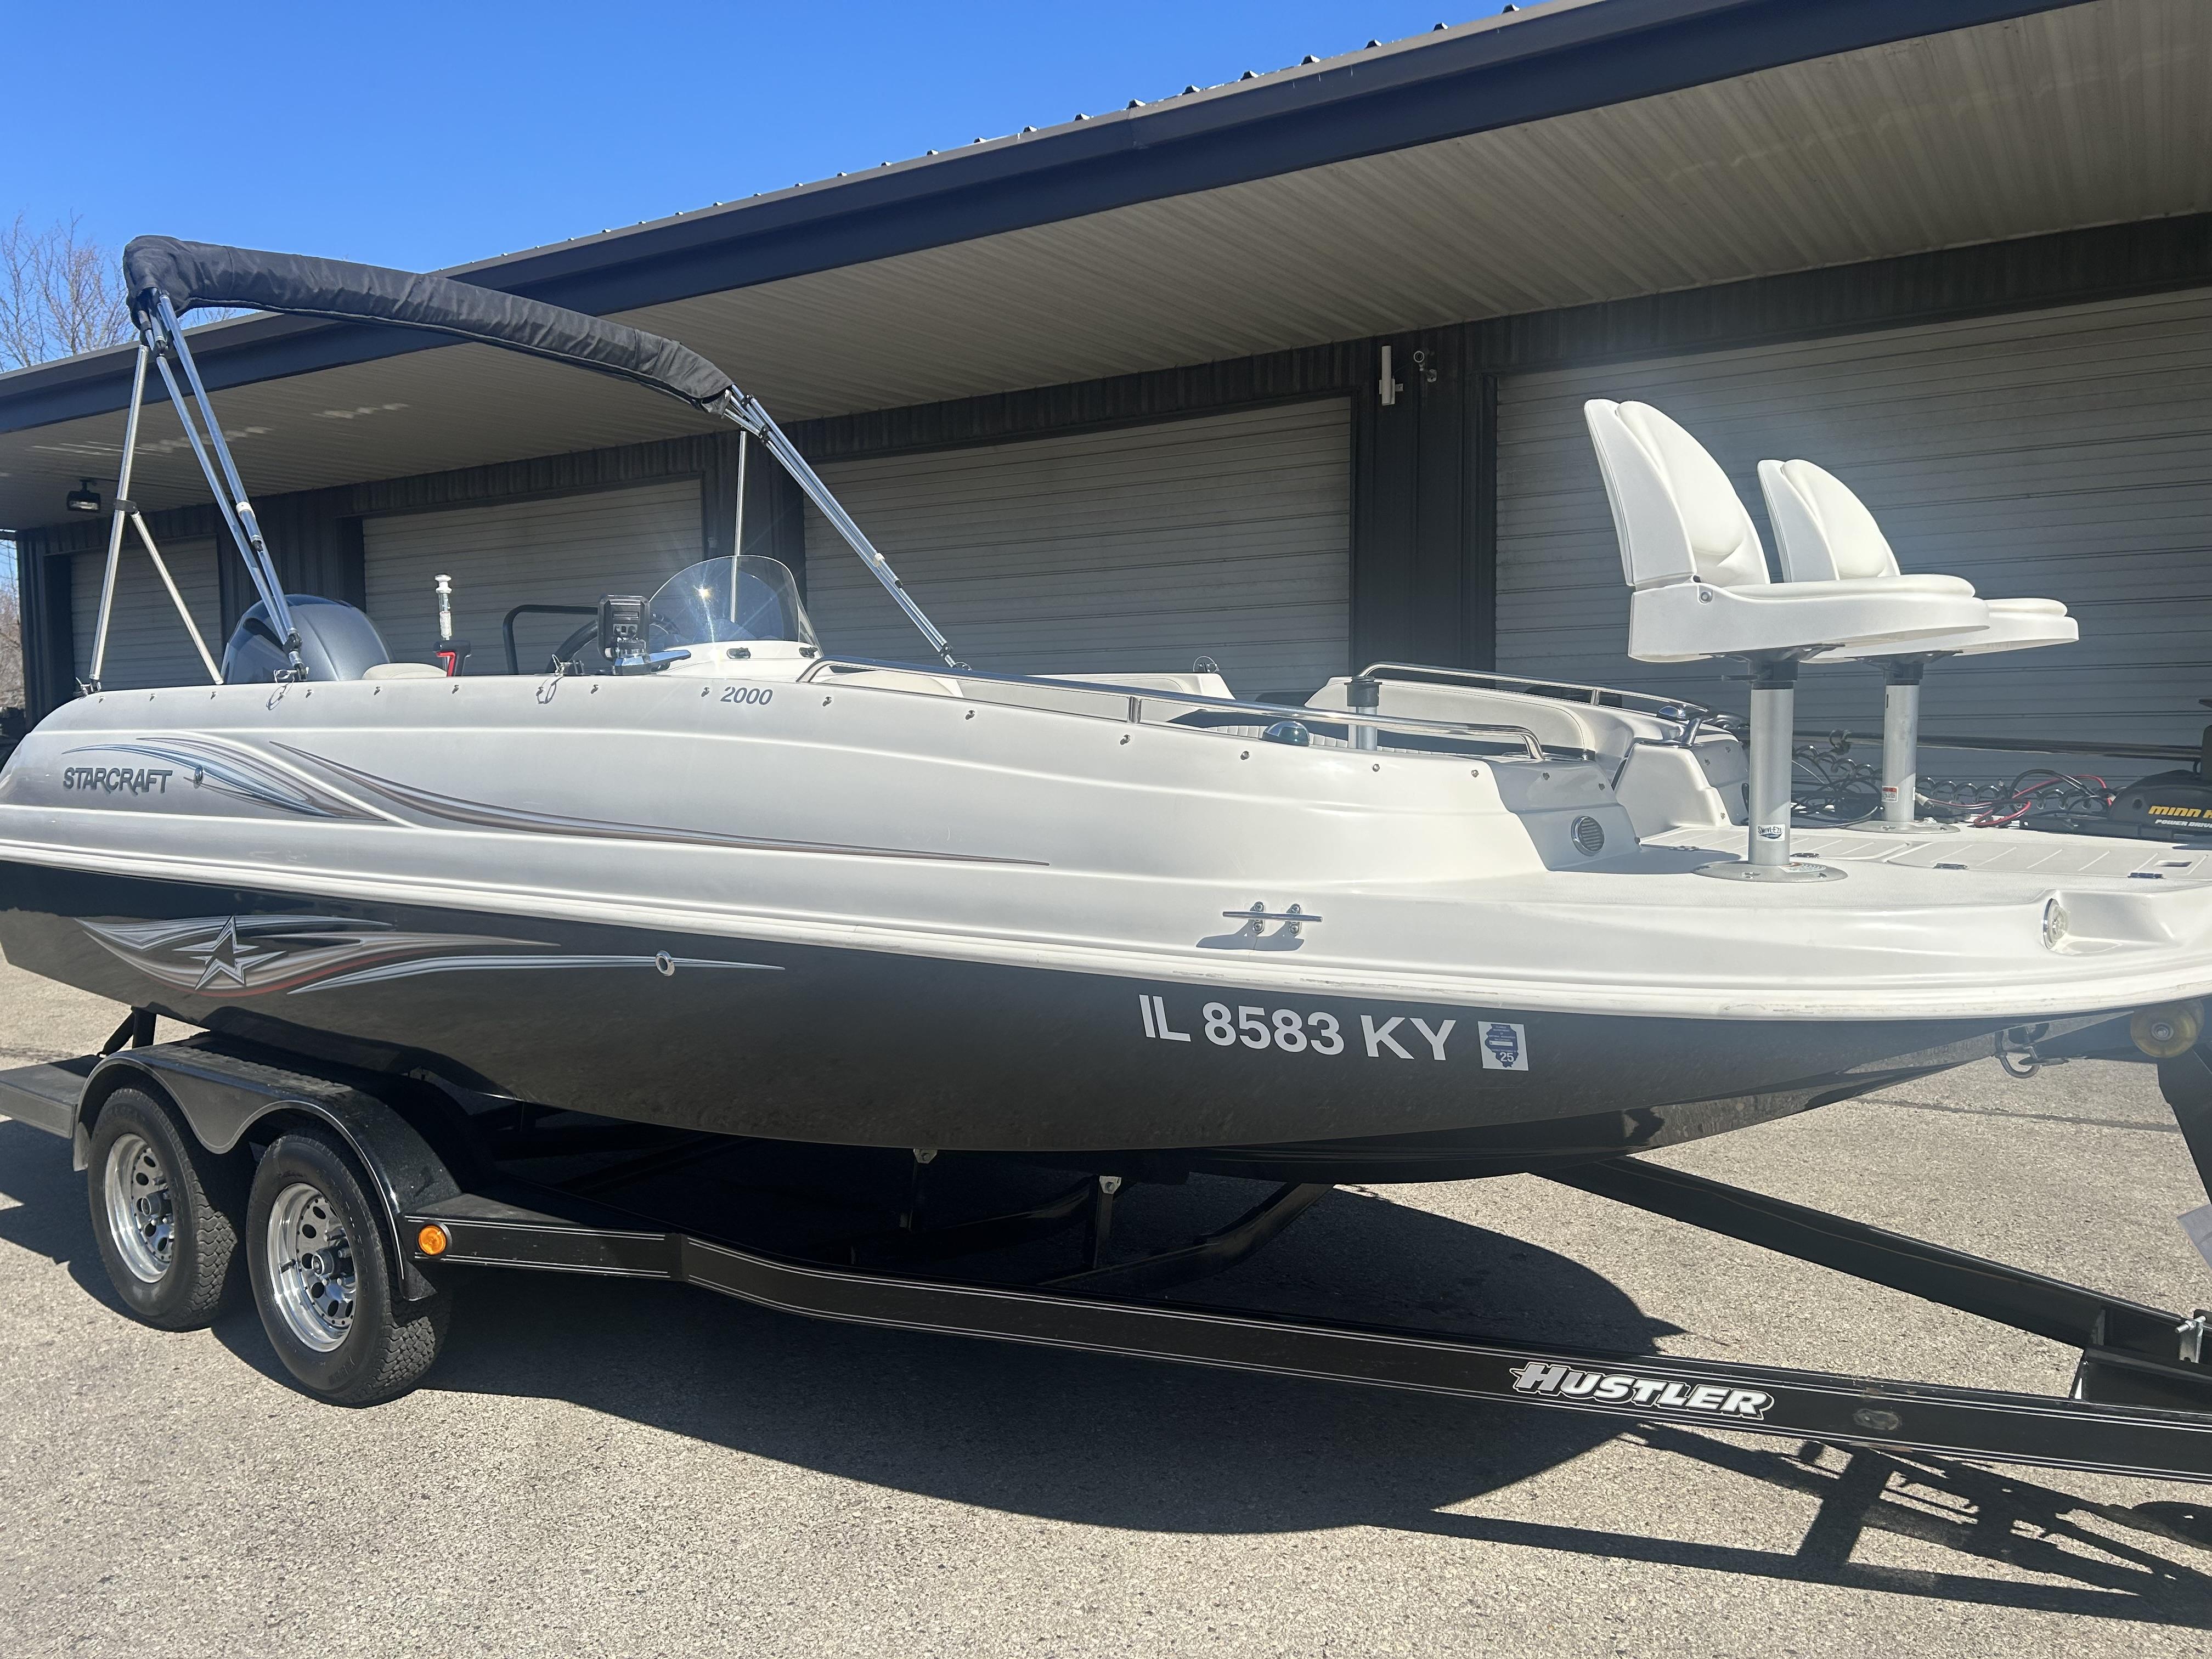 Starcraft boats for sale in Wisconsin - boats.com